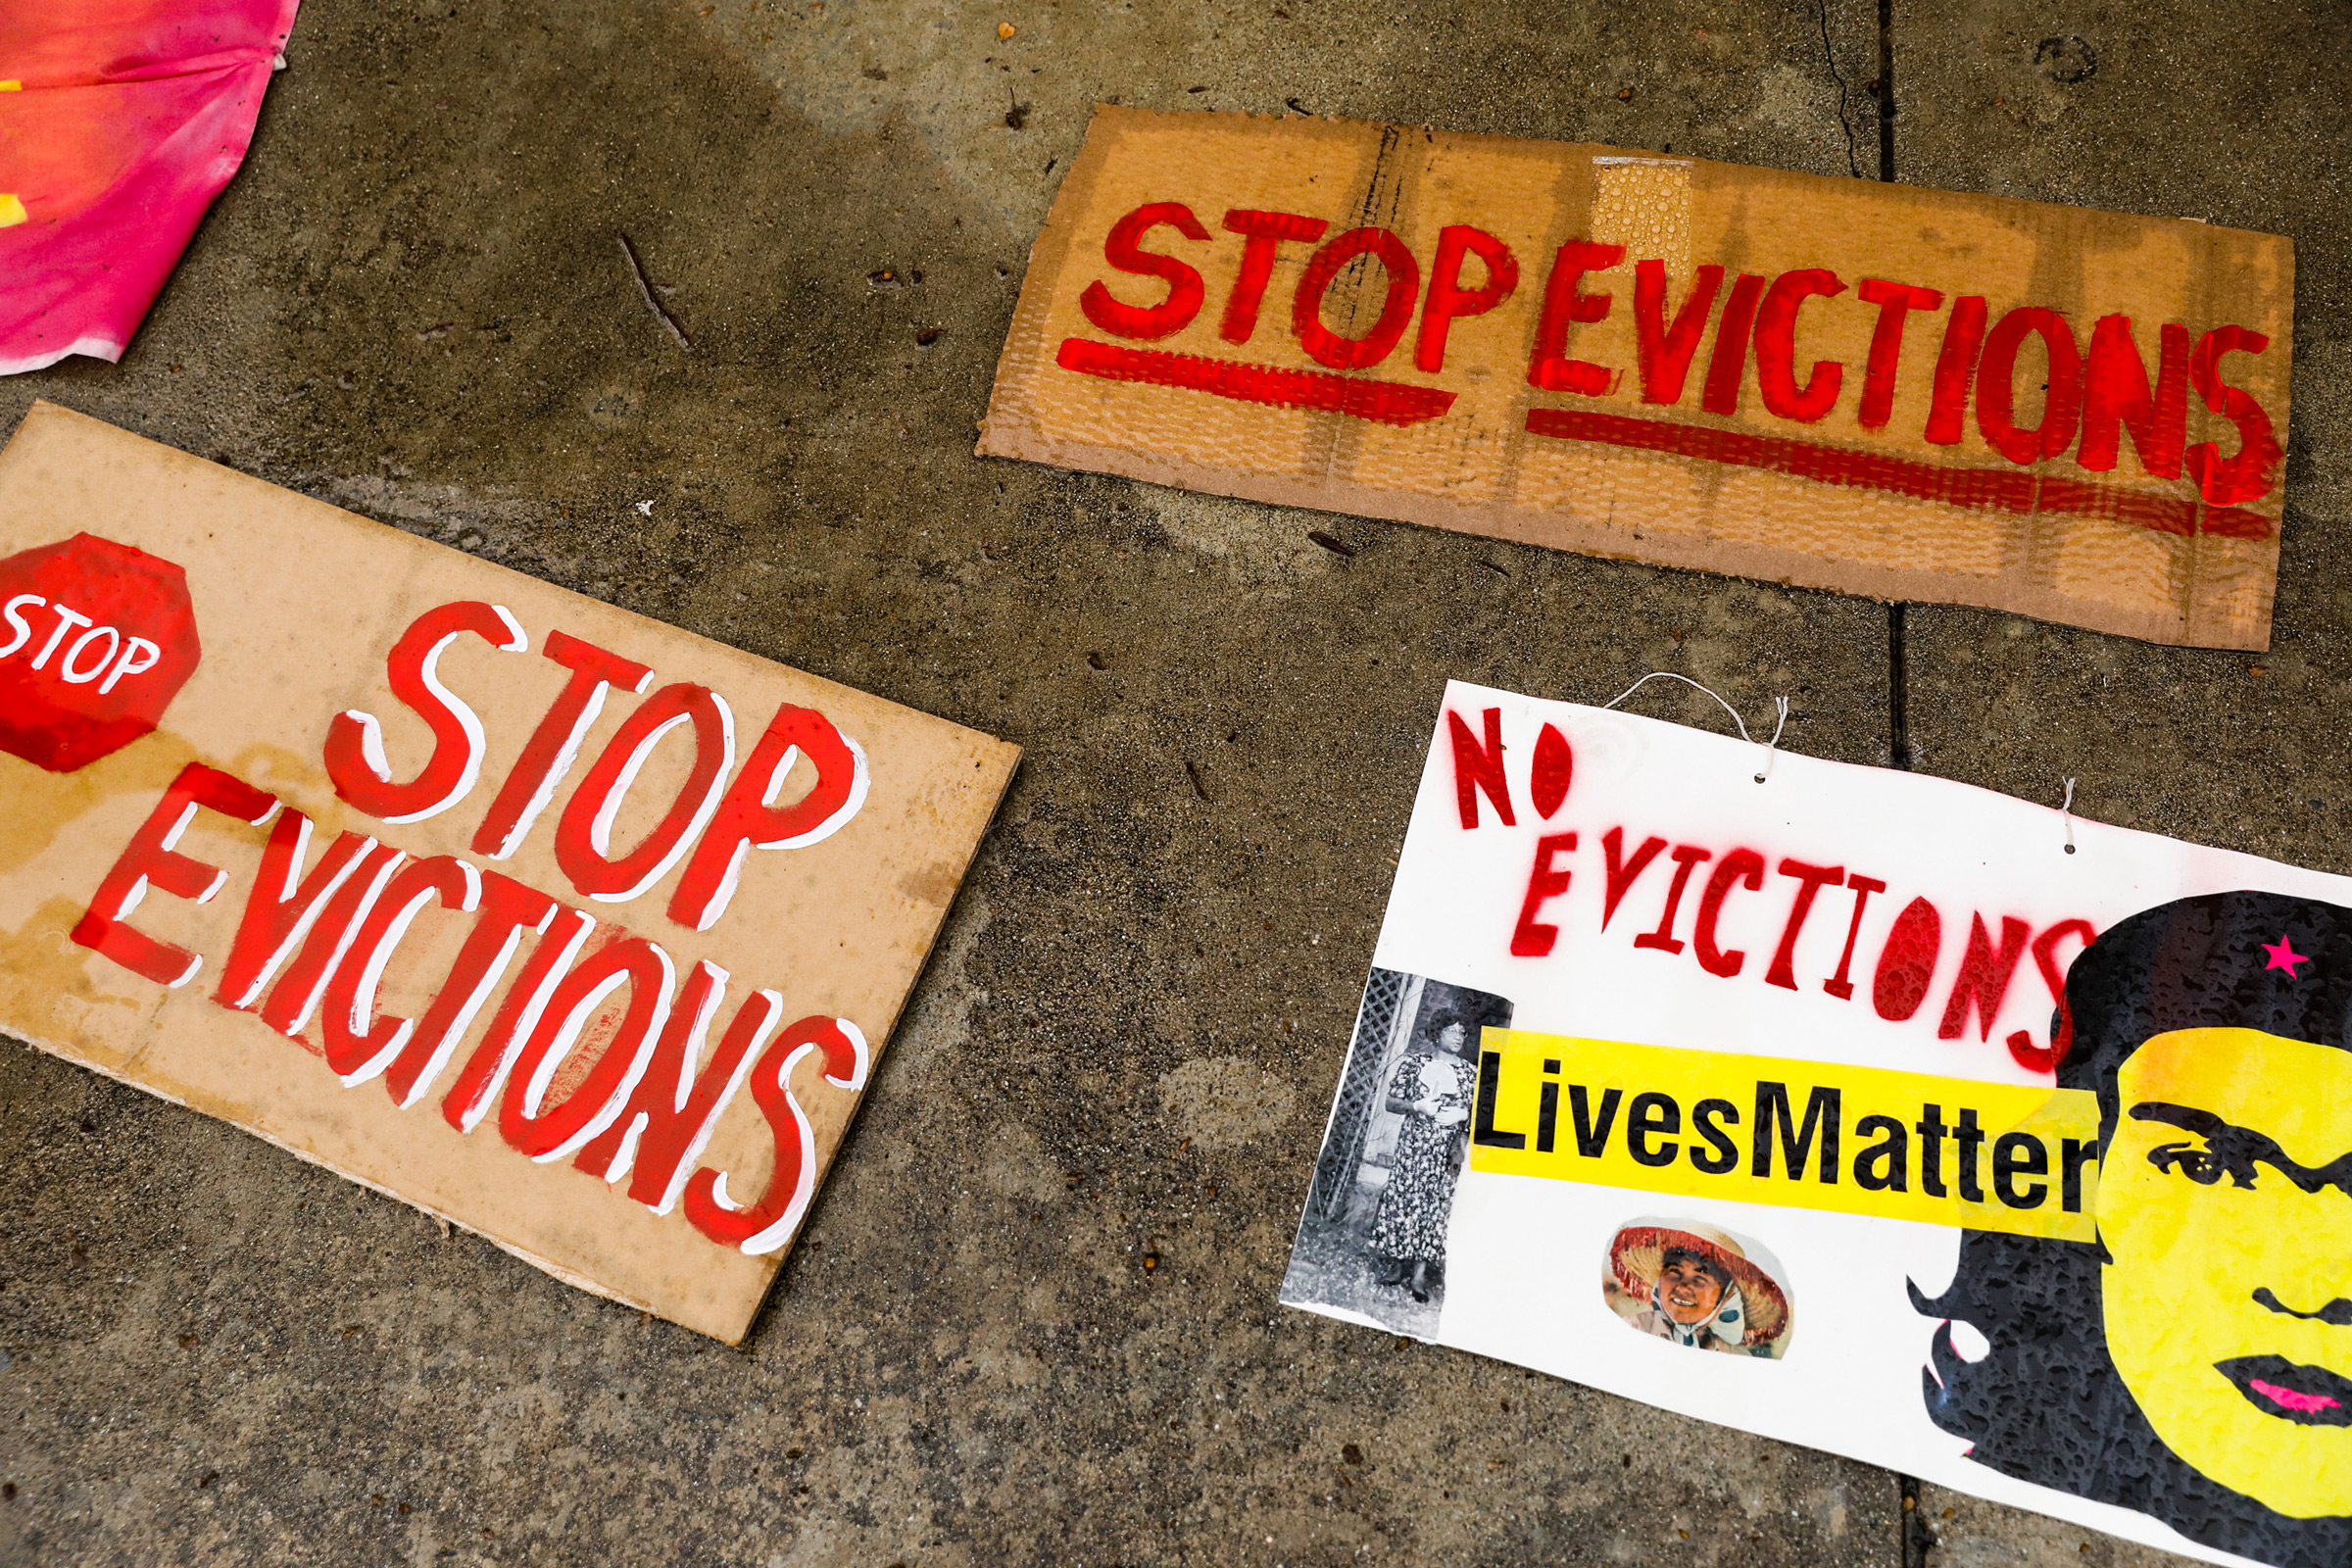 Signage lays on the ground during a protest outside the Santa Clara County Courthouse in San Jose to halt eviction proceedings from taking place on Jan. 27. Although rent moratoriums were instituted to help people who lost their jobs due to coronavirus shutdowns, certain types of eviction actions are still going forward. (Gabrielle Lurie—The San Francisco Chronicle/Getty Images)